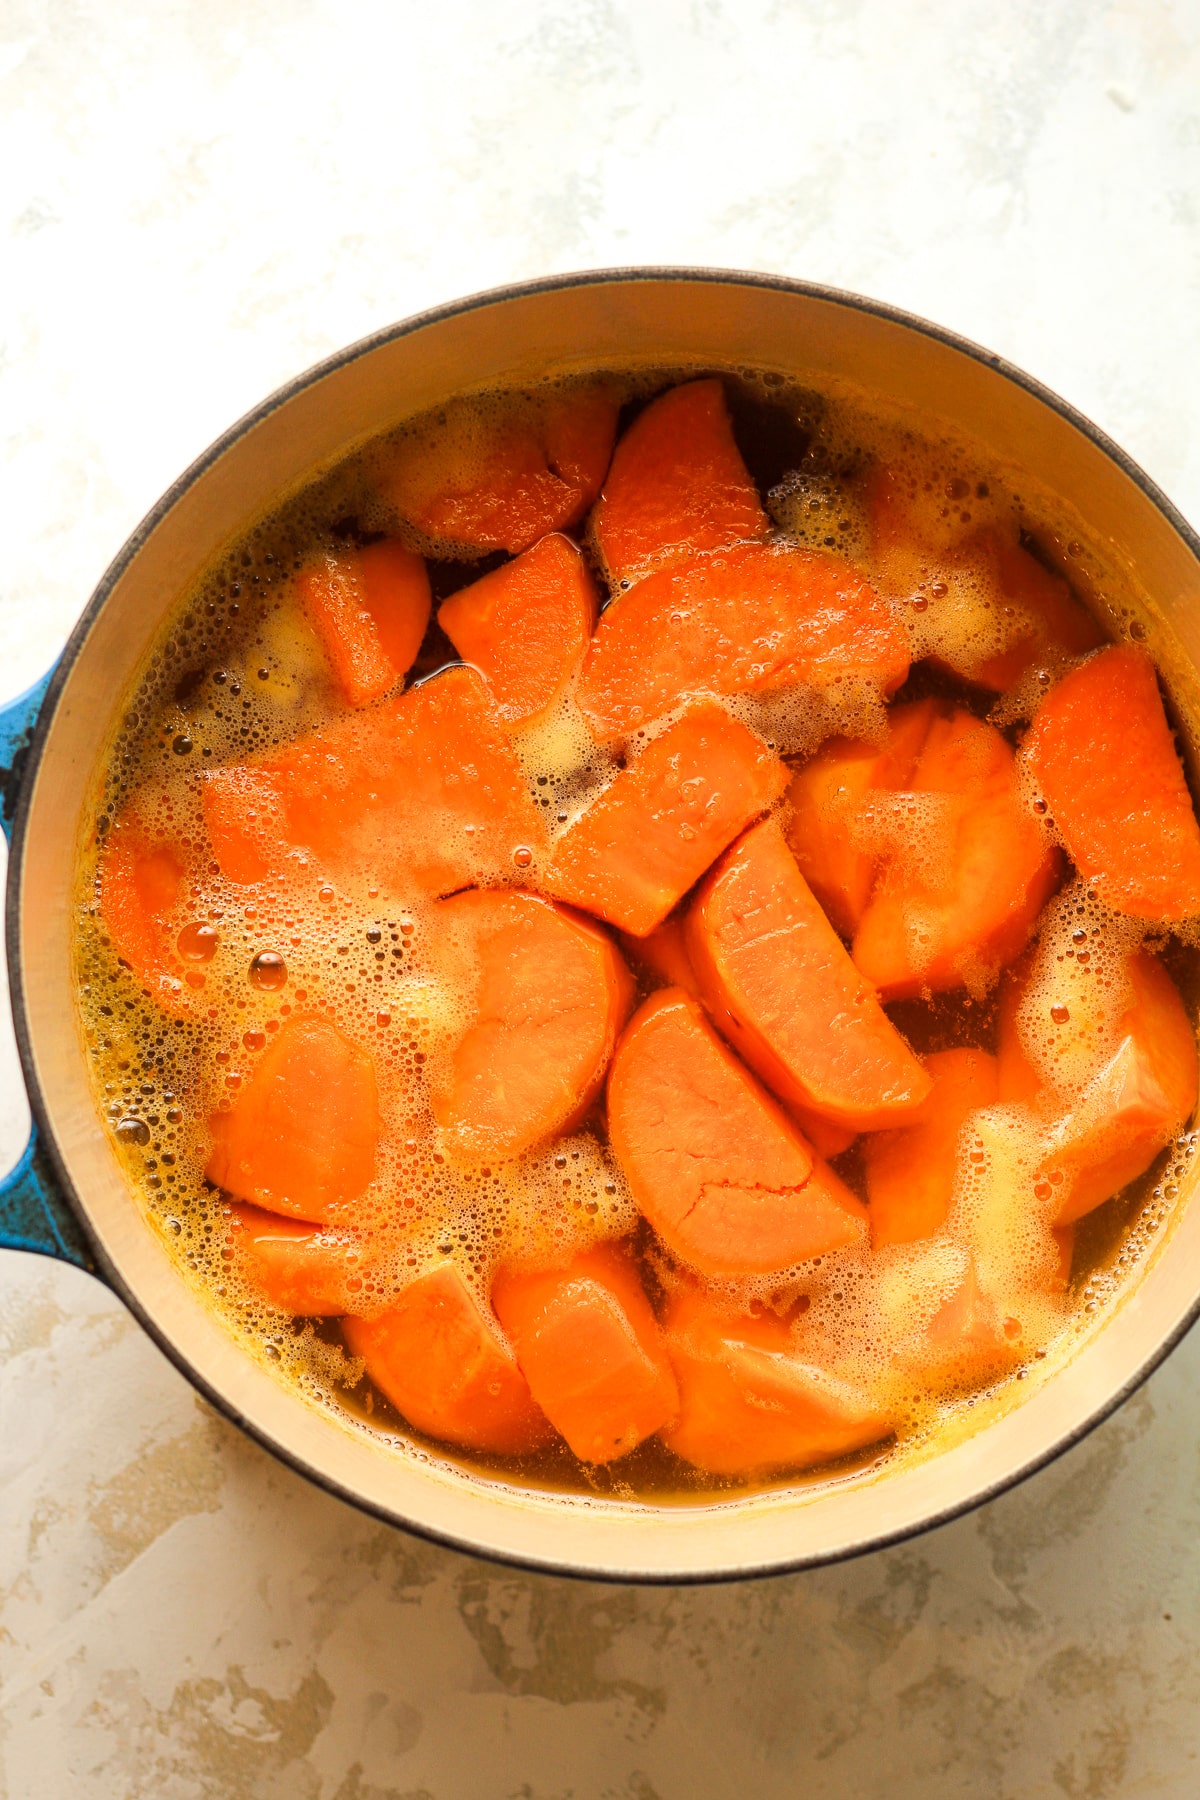 A pot of the boiled sweet potatoes.